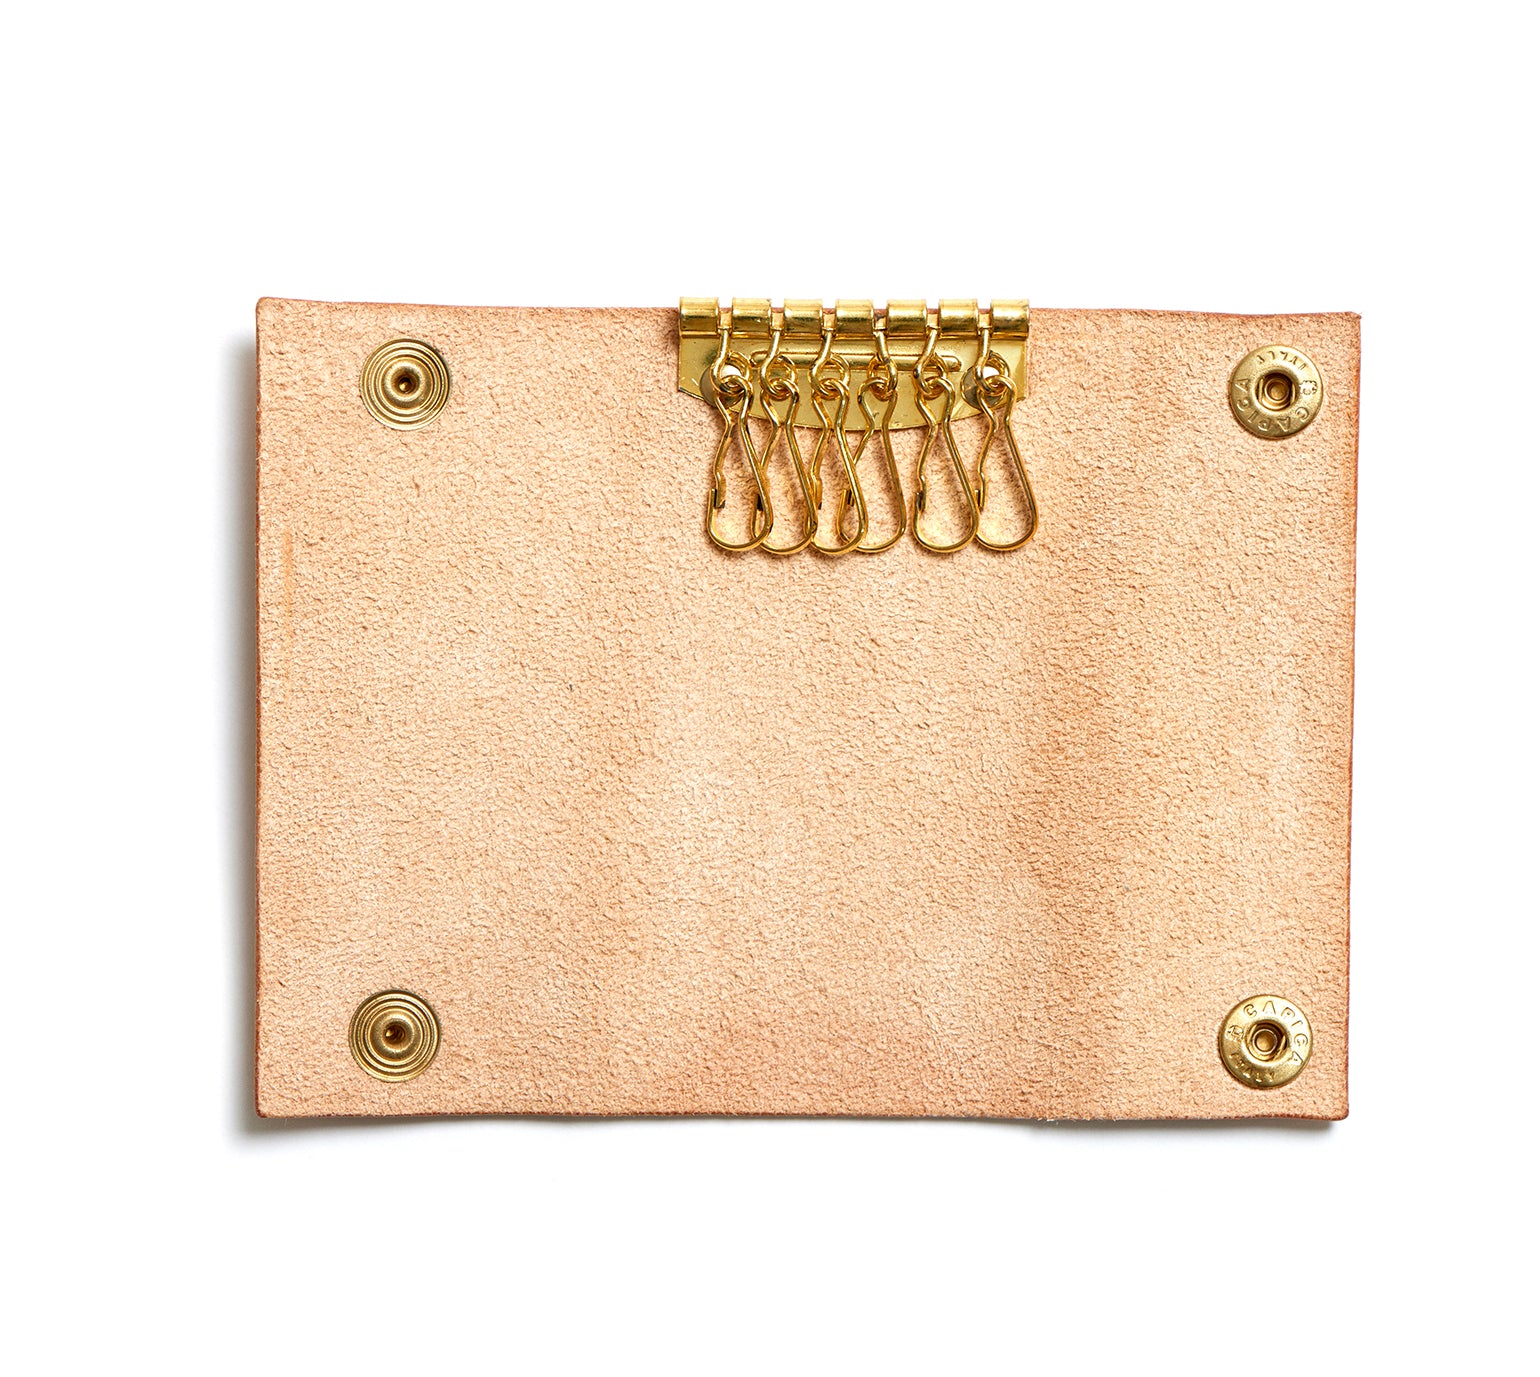 Leather key pouch: KARL (natural)